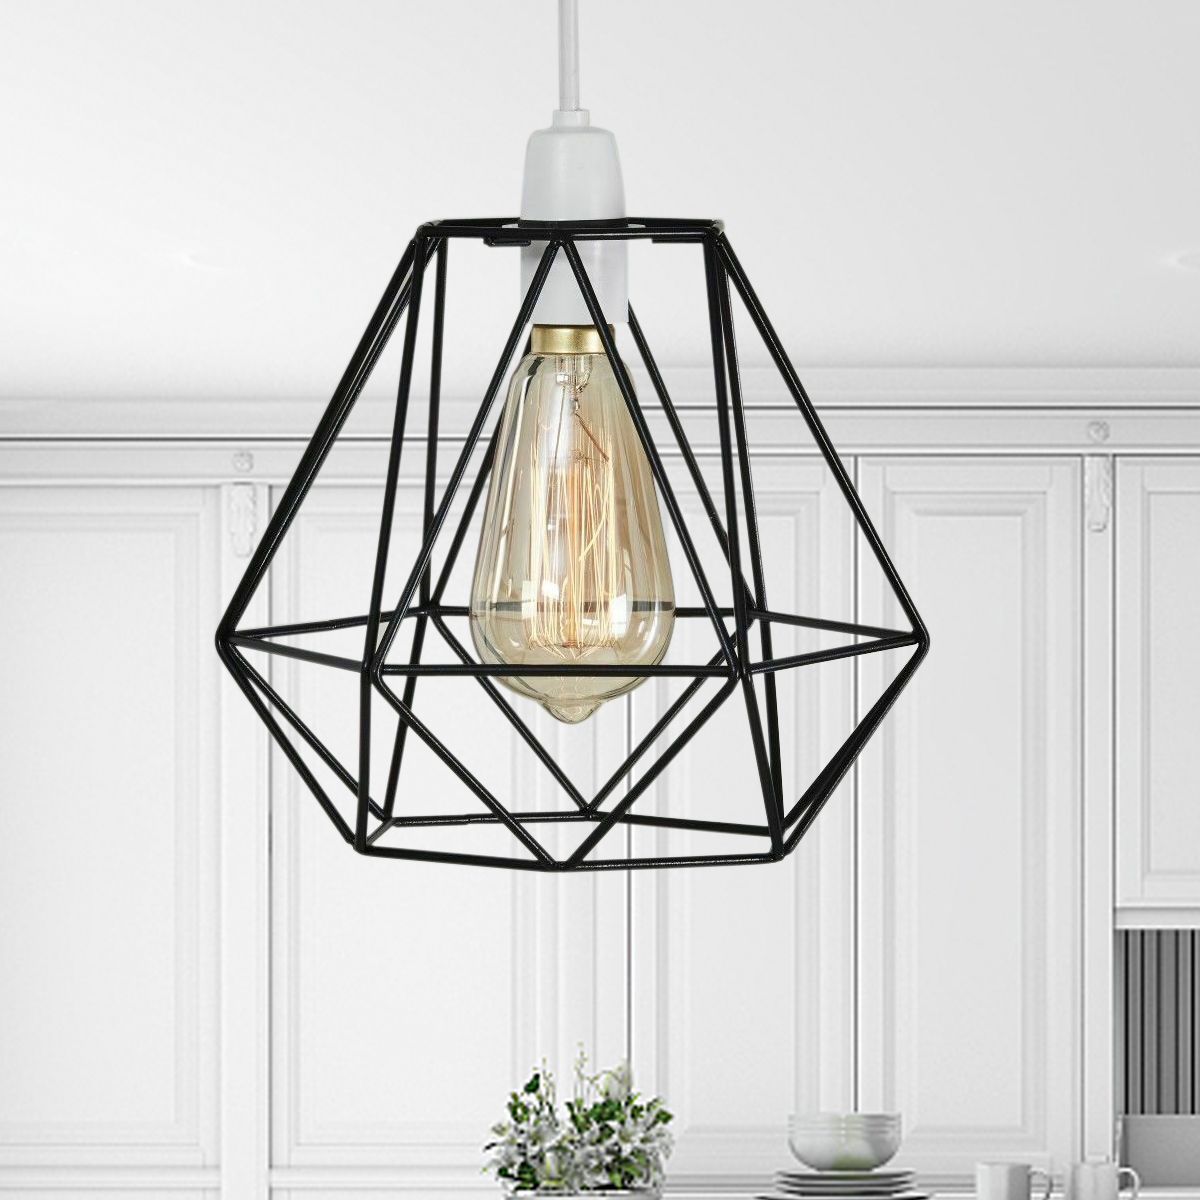 Geometric-Wire-Ceiling-Pendant-Light-Lampshade-Metal-Cage-Kitchen-Dining-Cafe-Without-Bulb-1758739-7